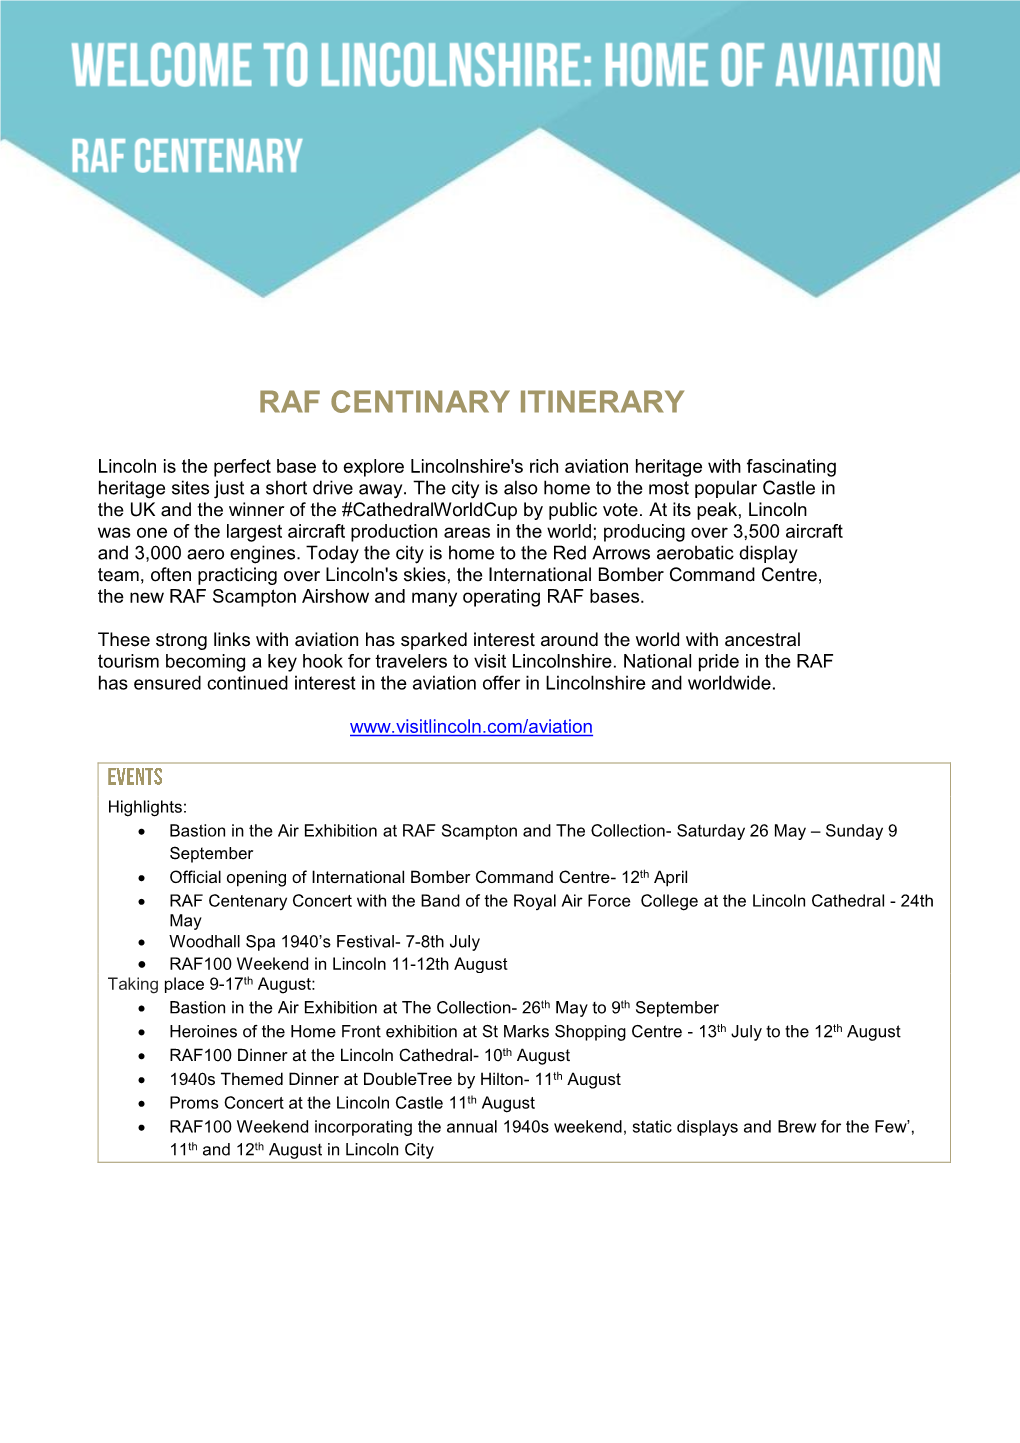 Download a Suggested RAF Centenary Itinerary